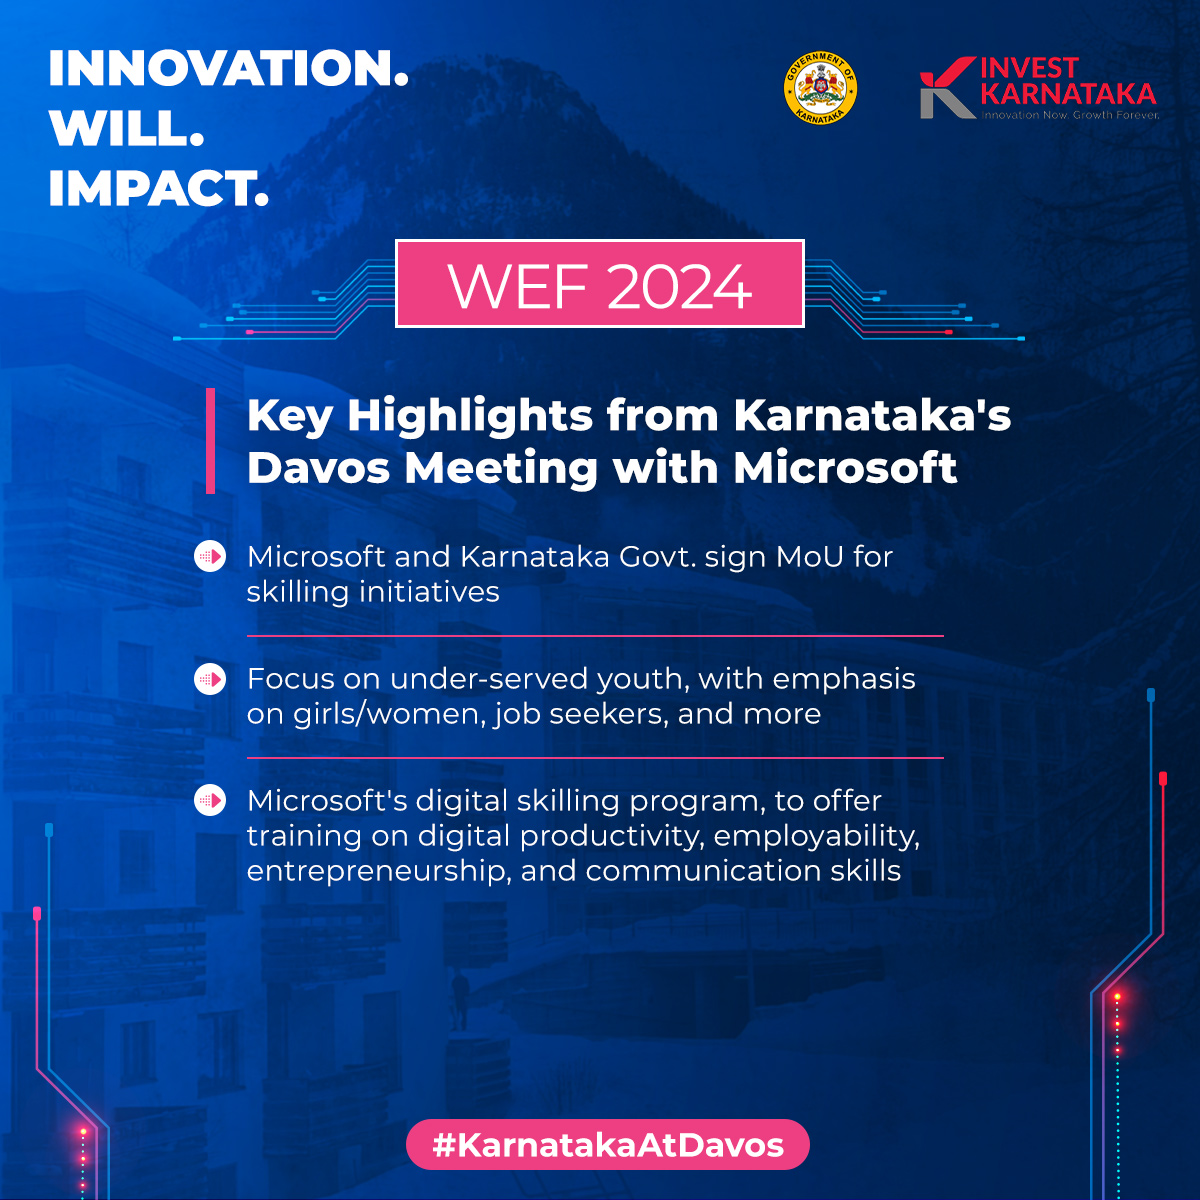 At #WEF24, #GoK partners with @Microsoft on a transformative skilling initiative. Hon. Min. @mbpatil discusses with Microsoft's Jean-Philippe Courtois, the opportunities for under-served youth. #KarnatakaAtDavos #KarnatakaGrowthStory #DigitalOpportunities